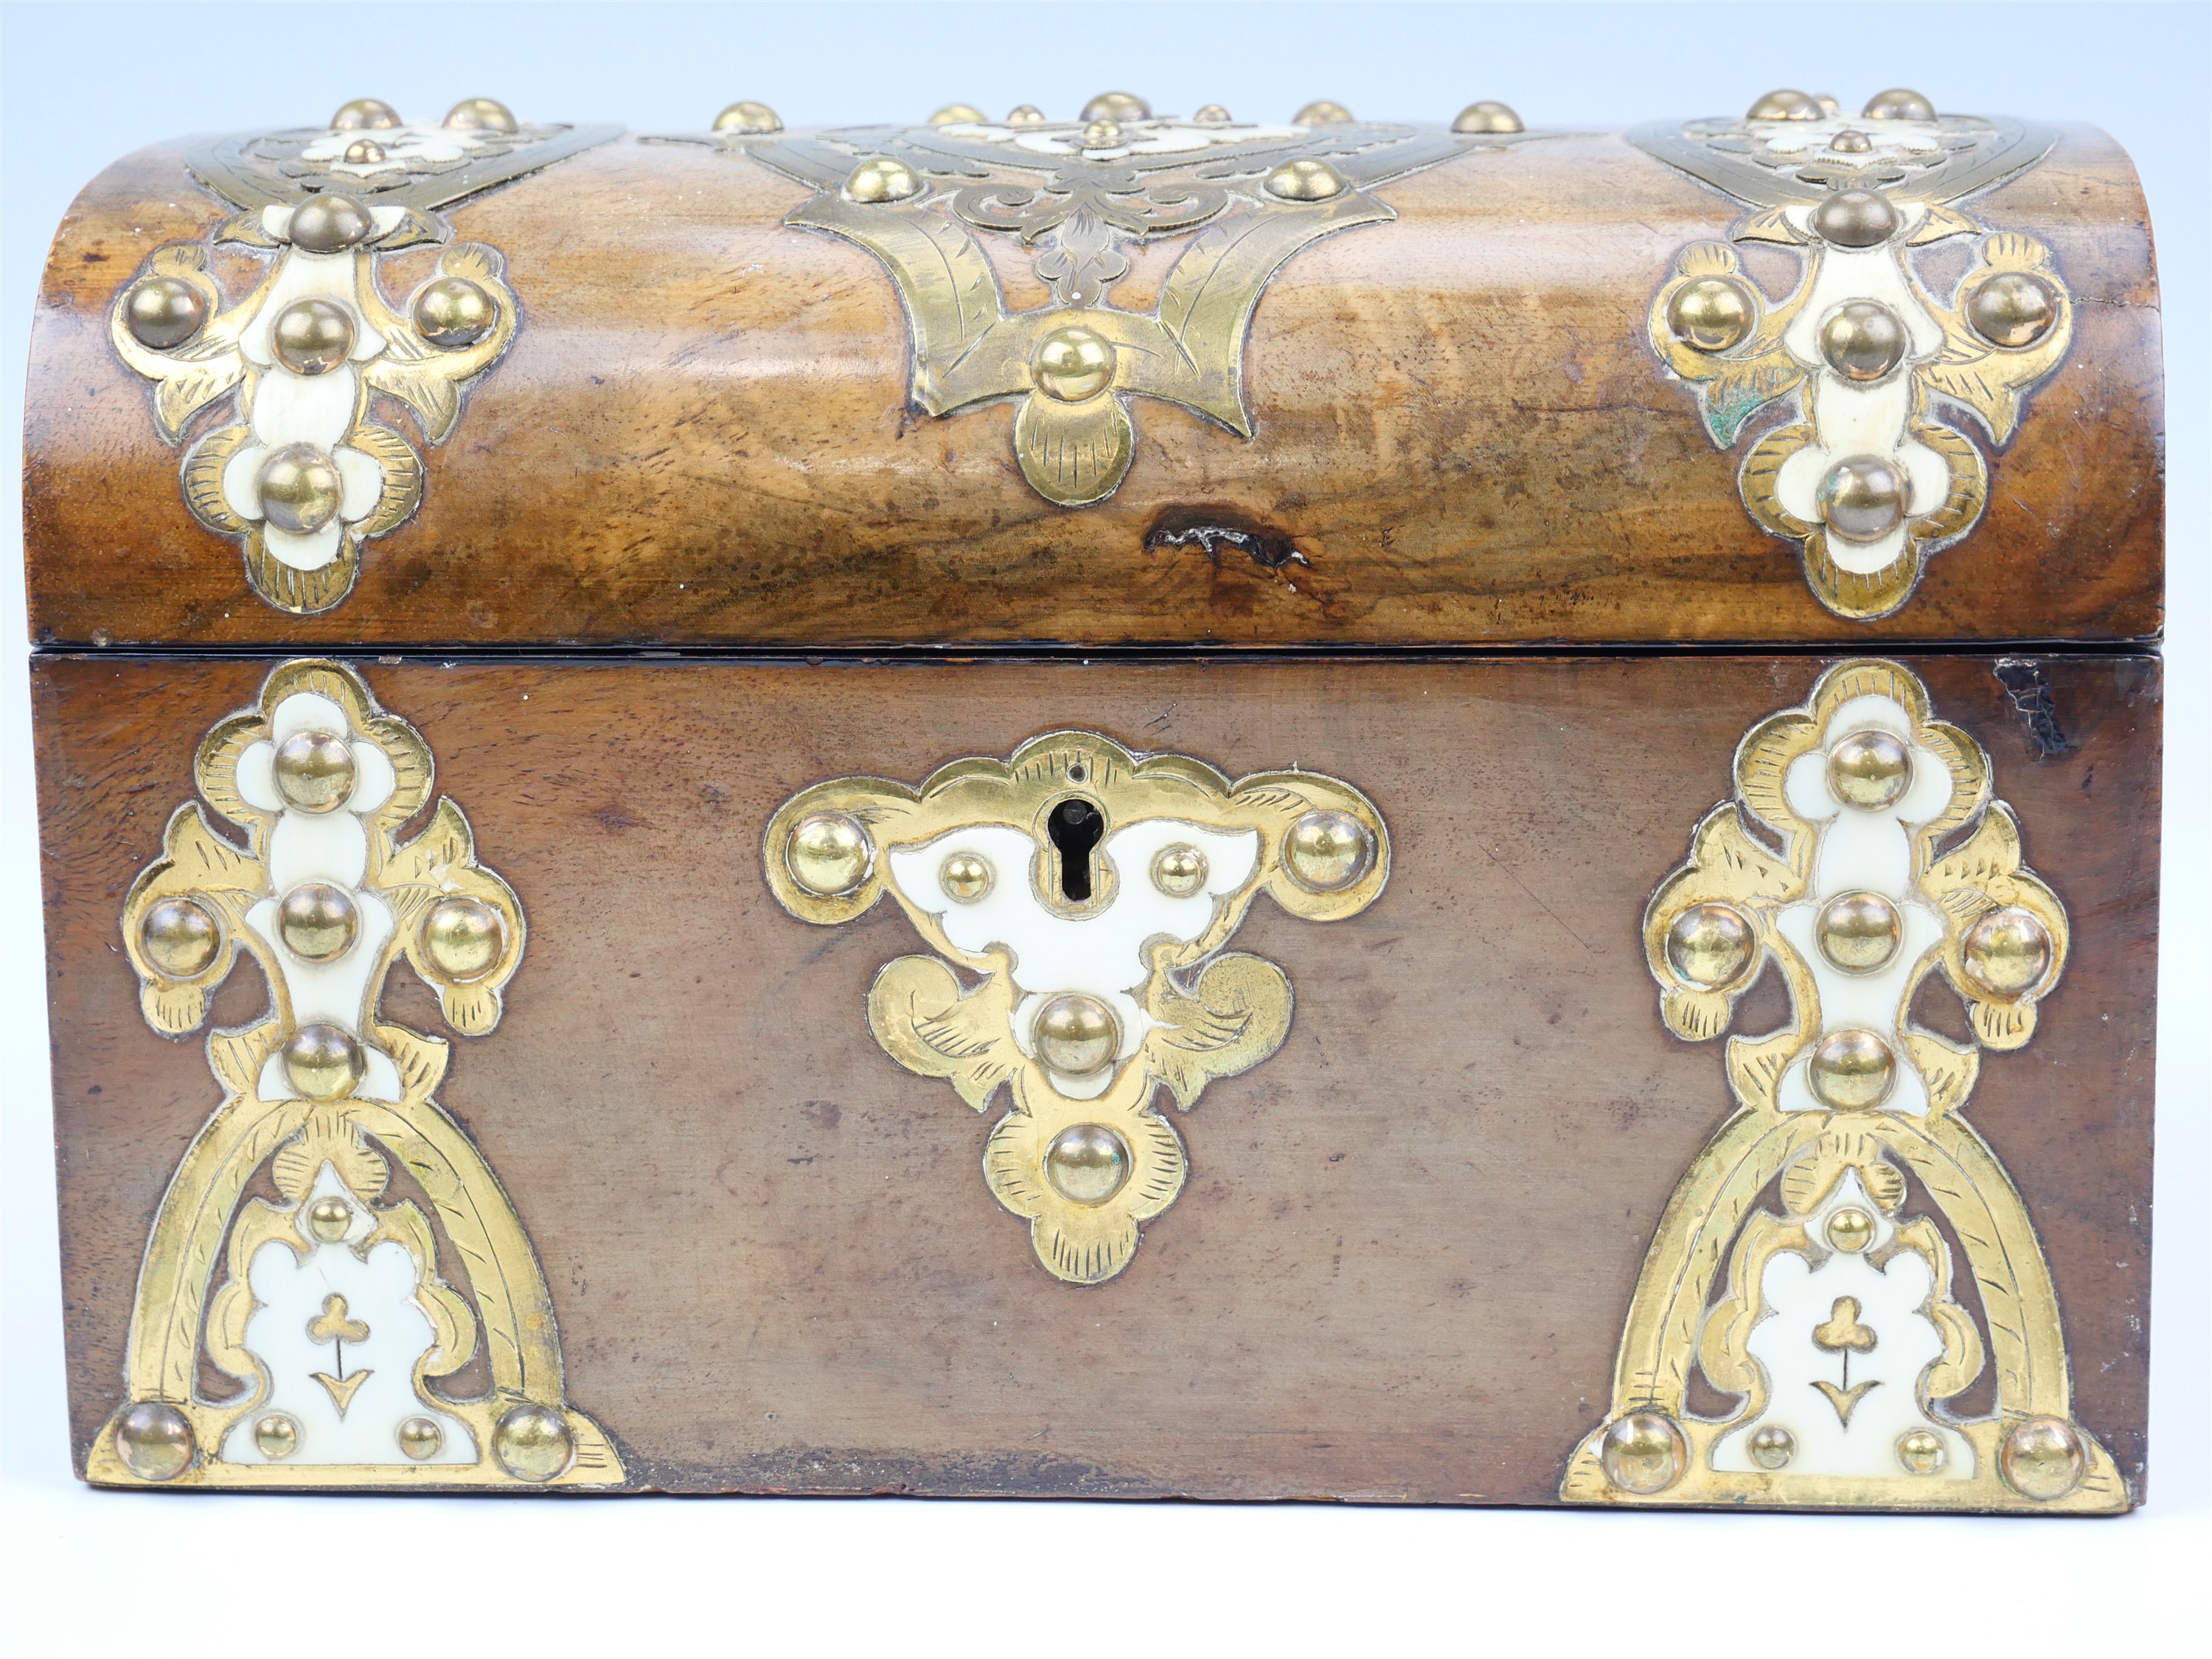 A Victorian walnut veneered dome top two compartment tea caddy, decorated with ivory, and pierced - Image 2 of 4